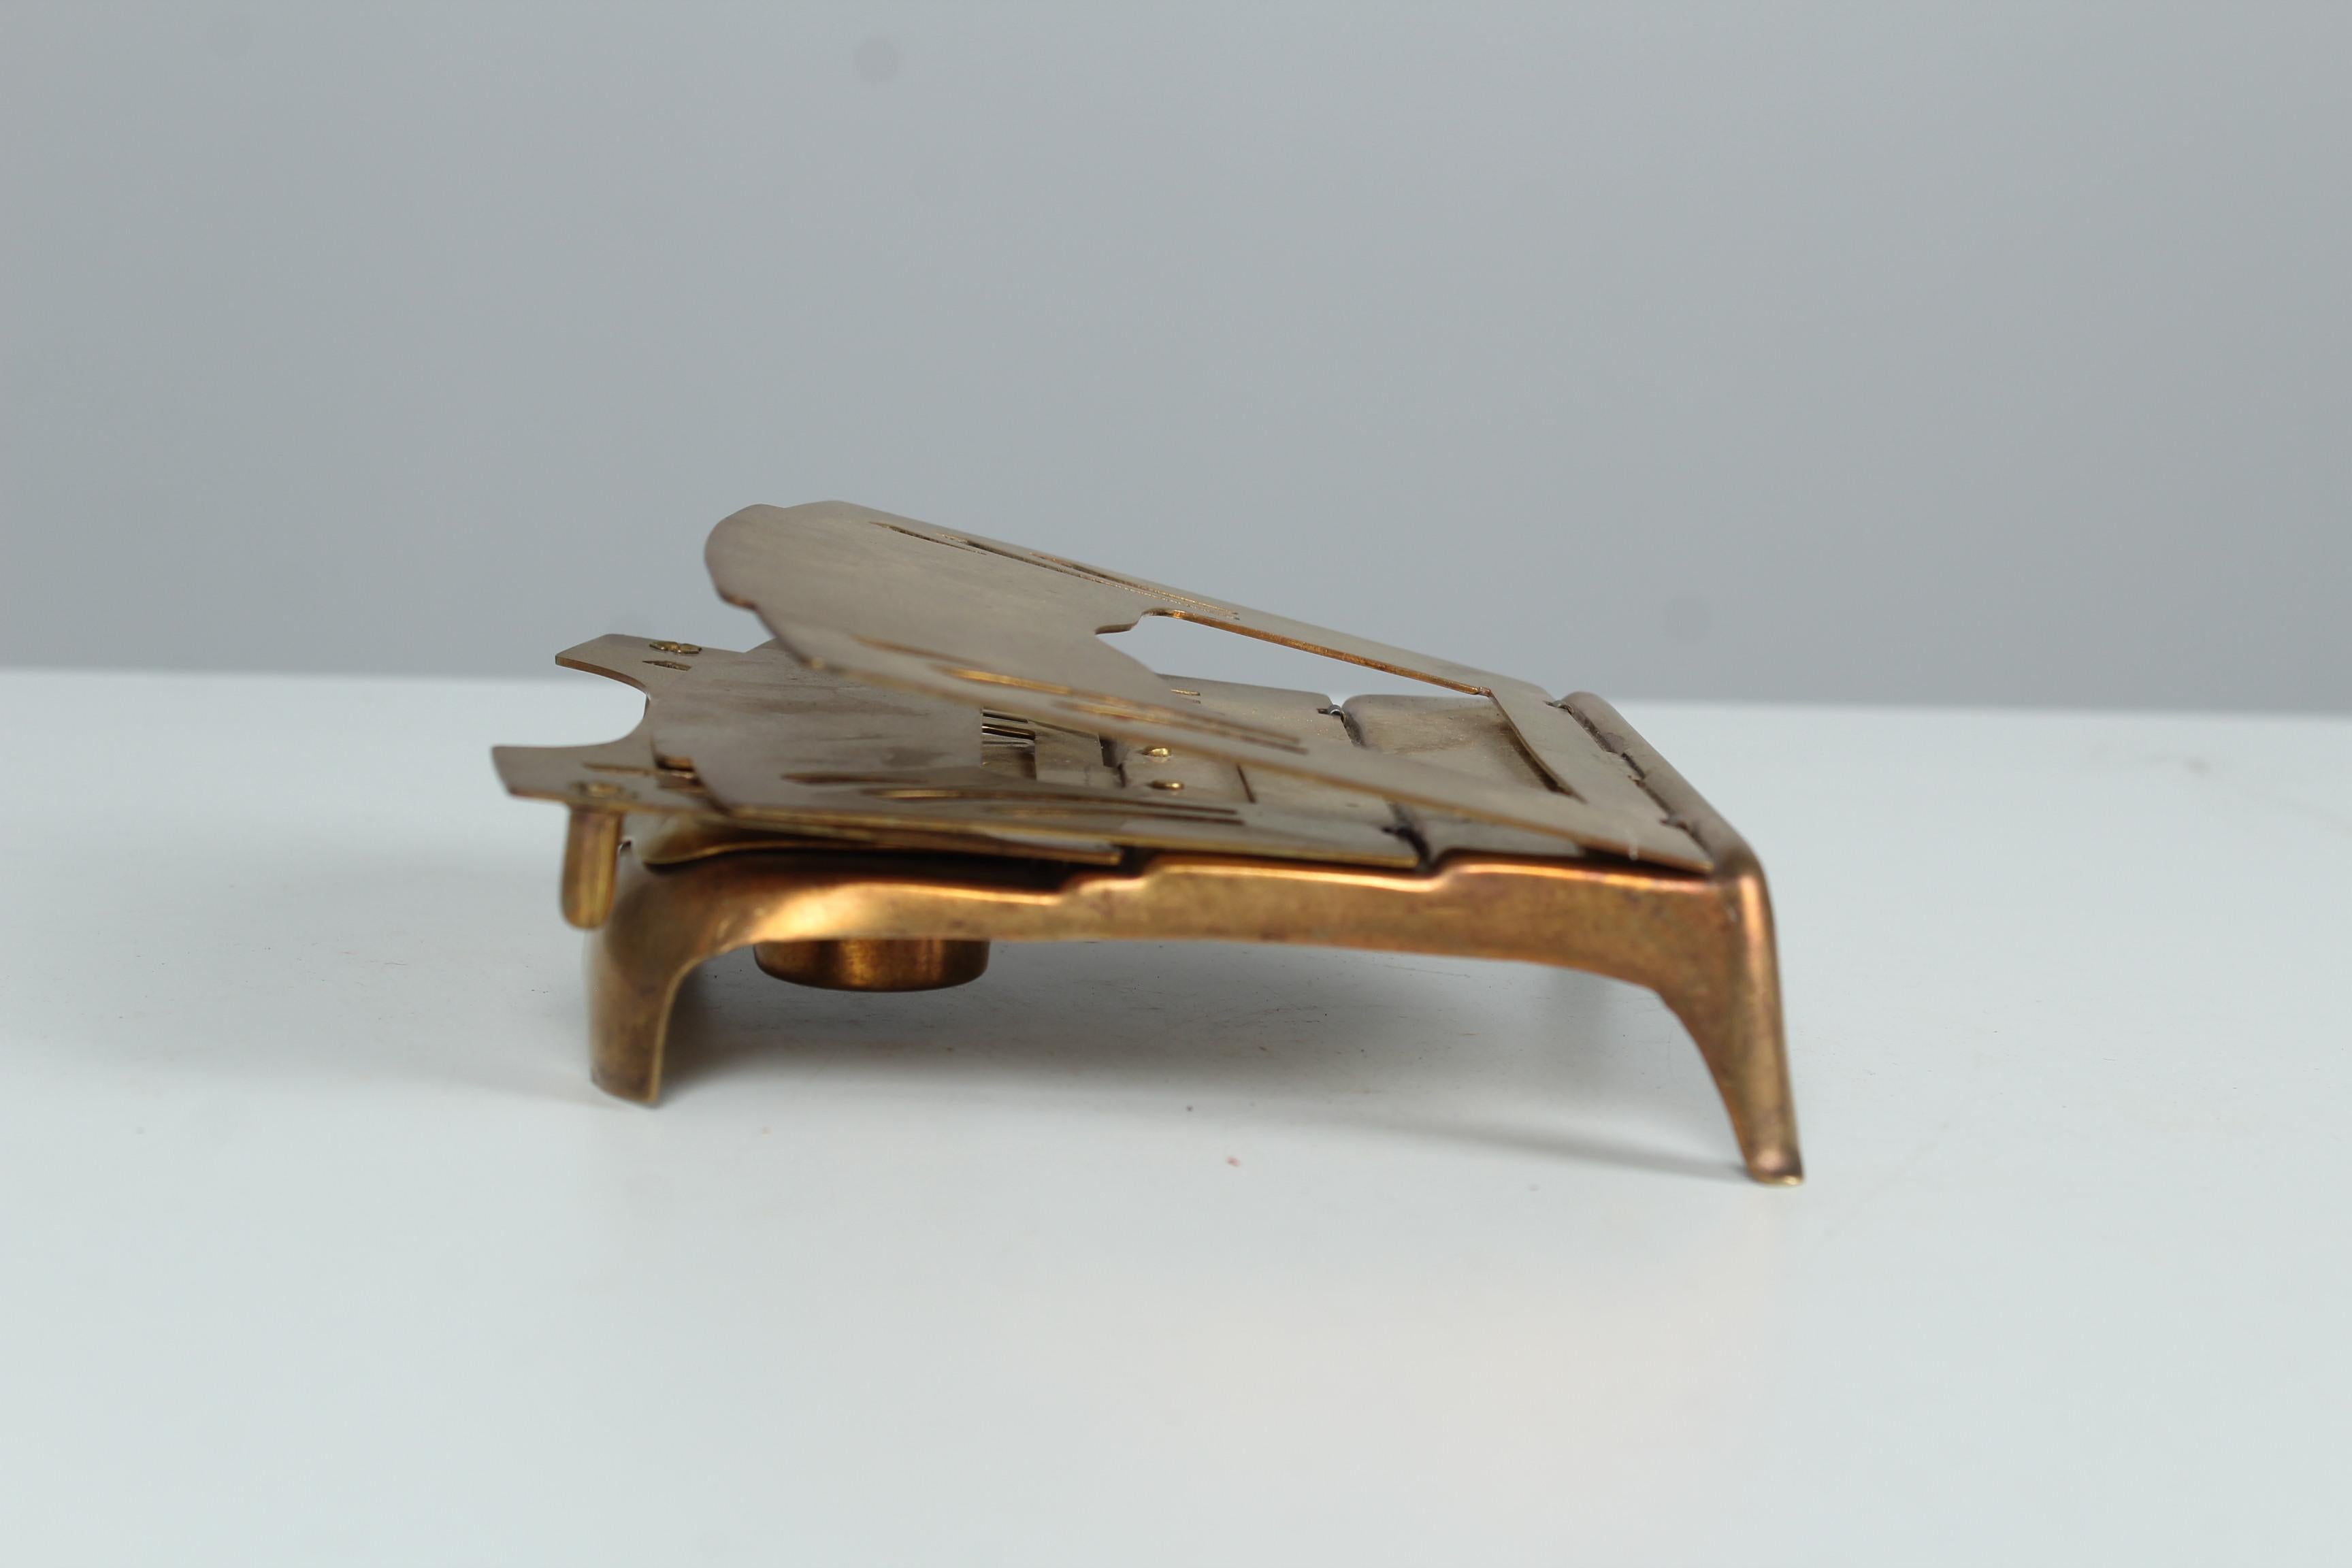 Beautiful antique desk utensil from brass. Letter holder with inkwell.

